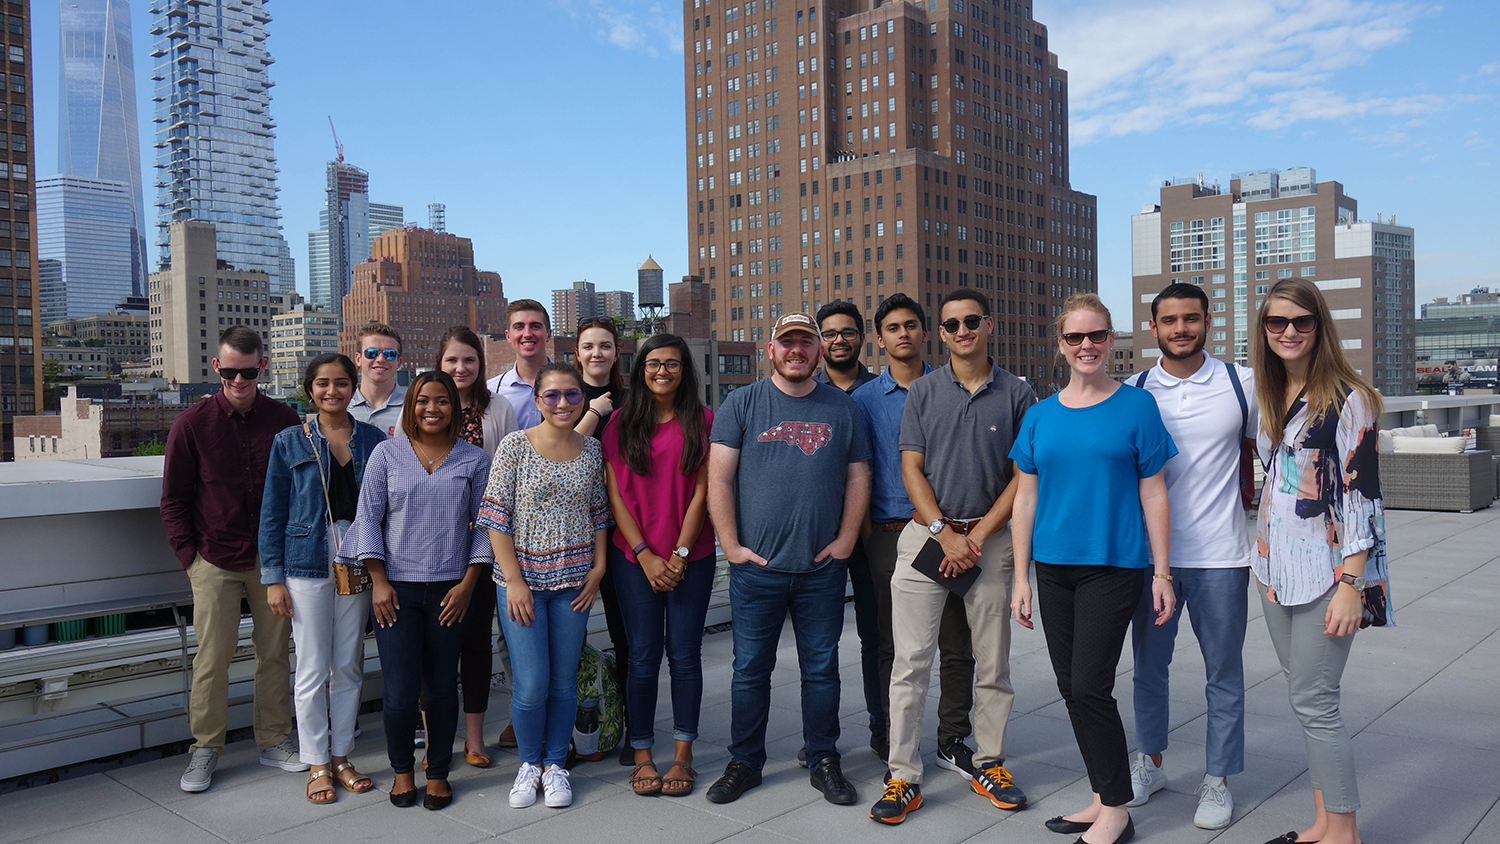 Group of Entrepenrship students smiling on rooftop in NYC